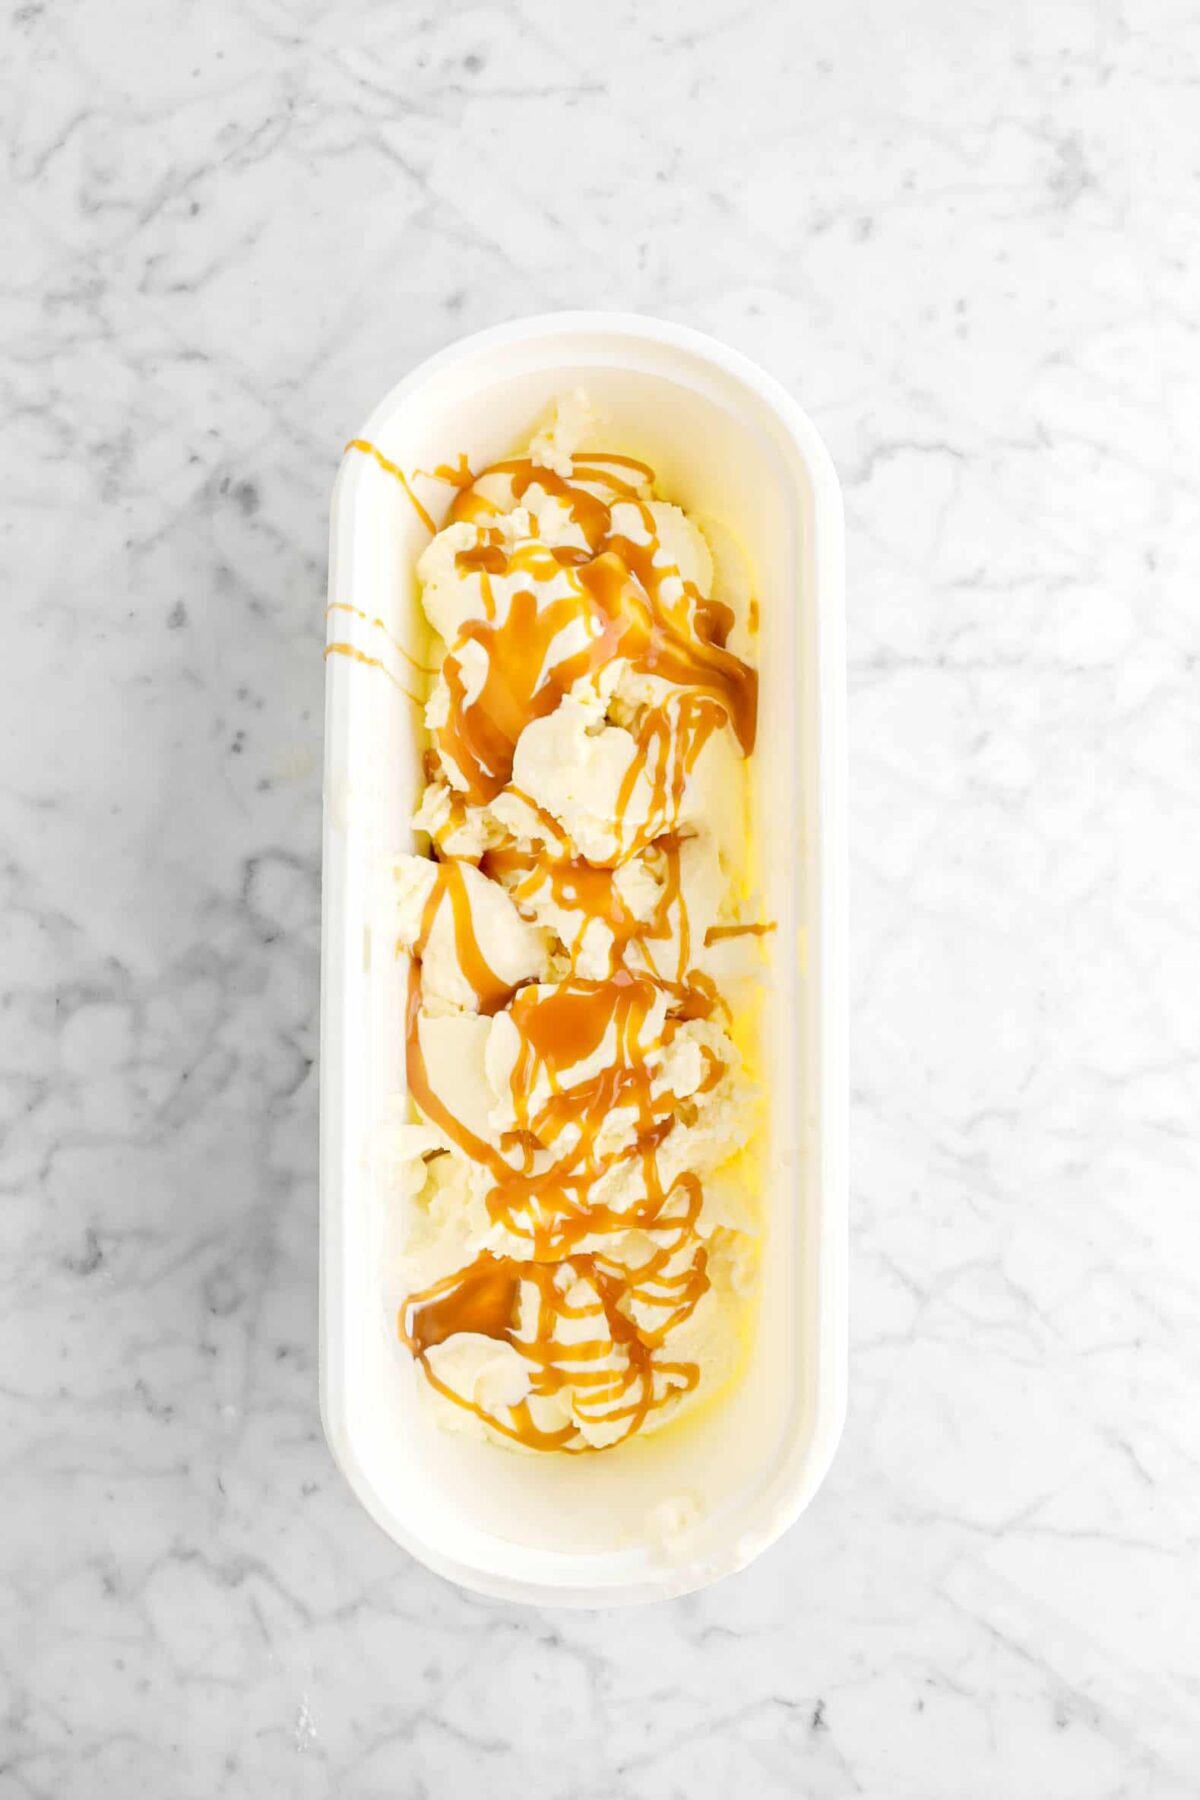 ice cream and caramel in container